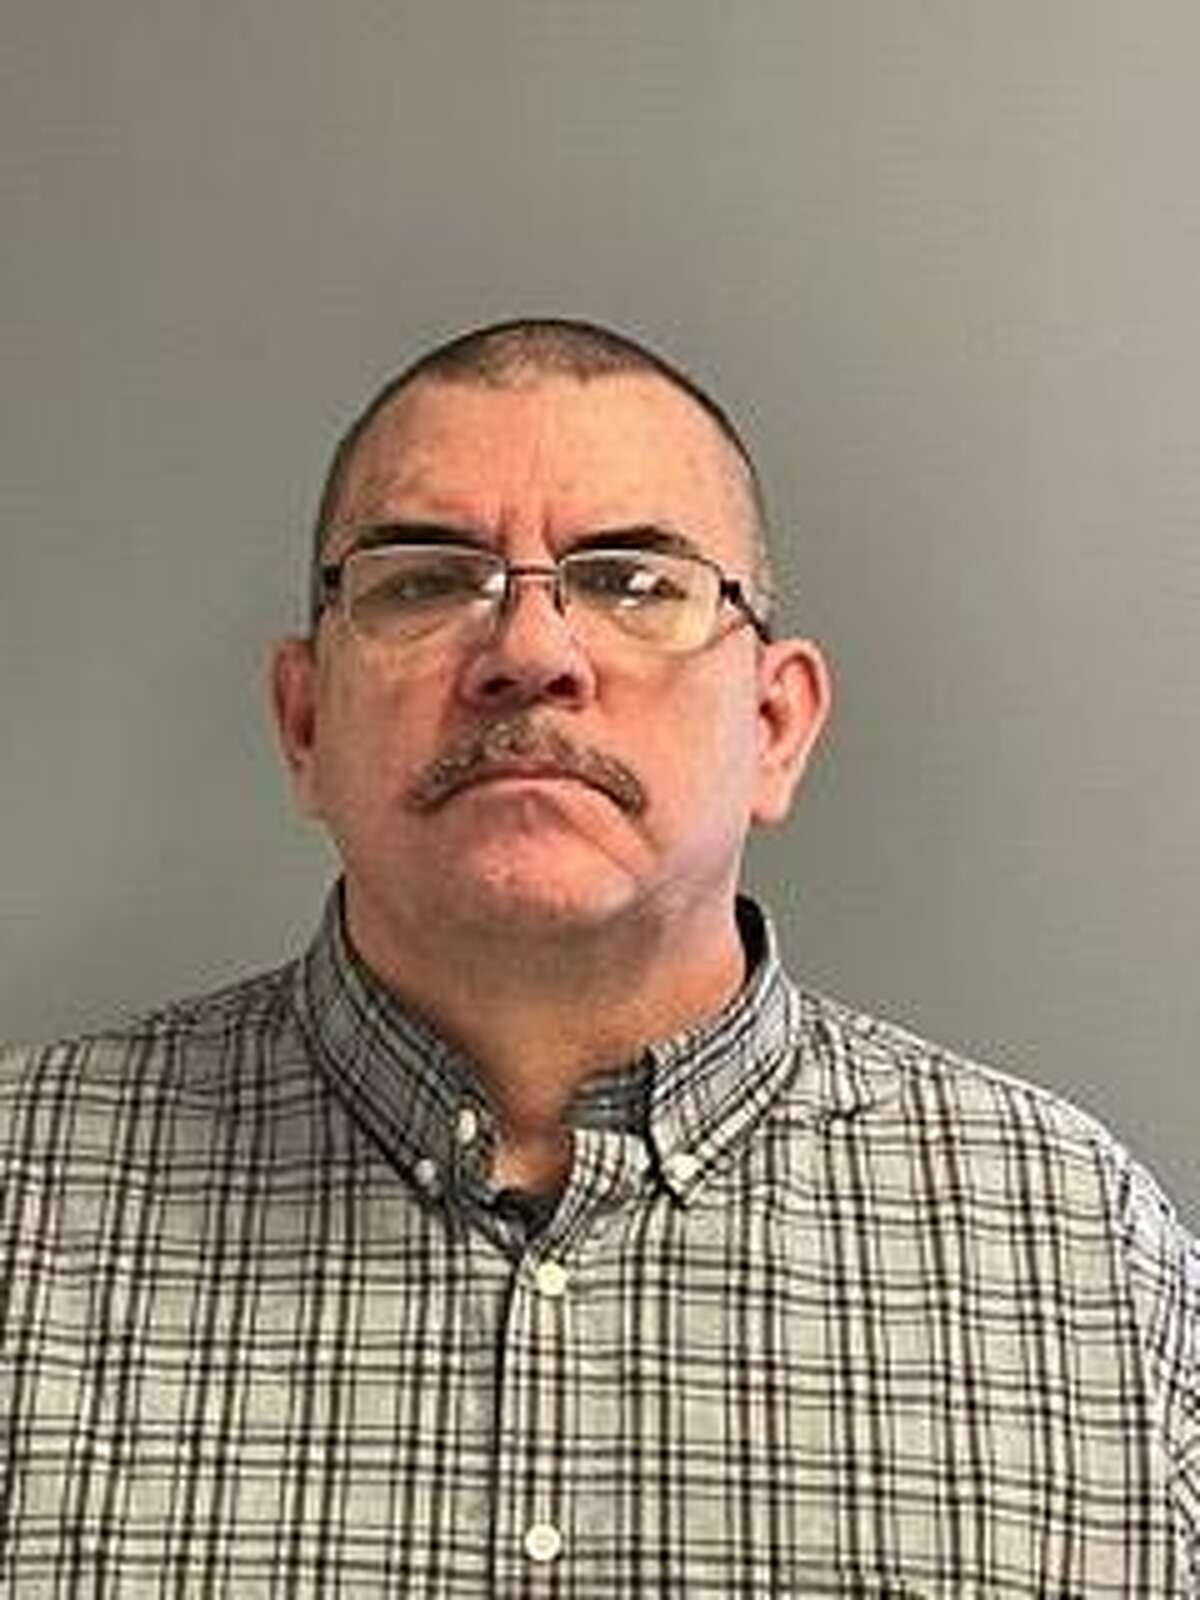 Frederick Seymour, 58, of Windsor Locks was charged Friday in connection with the fatal hit and run incident that killed University of Connecticut student Meghan Voisine.